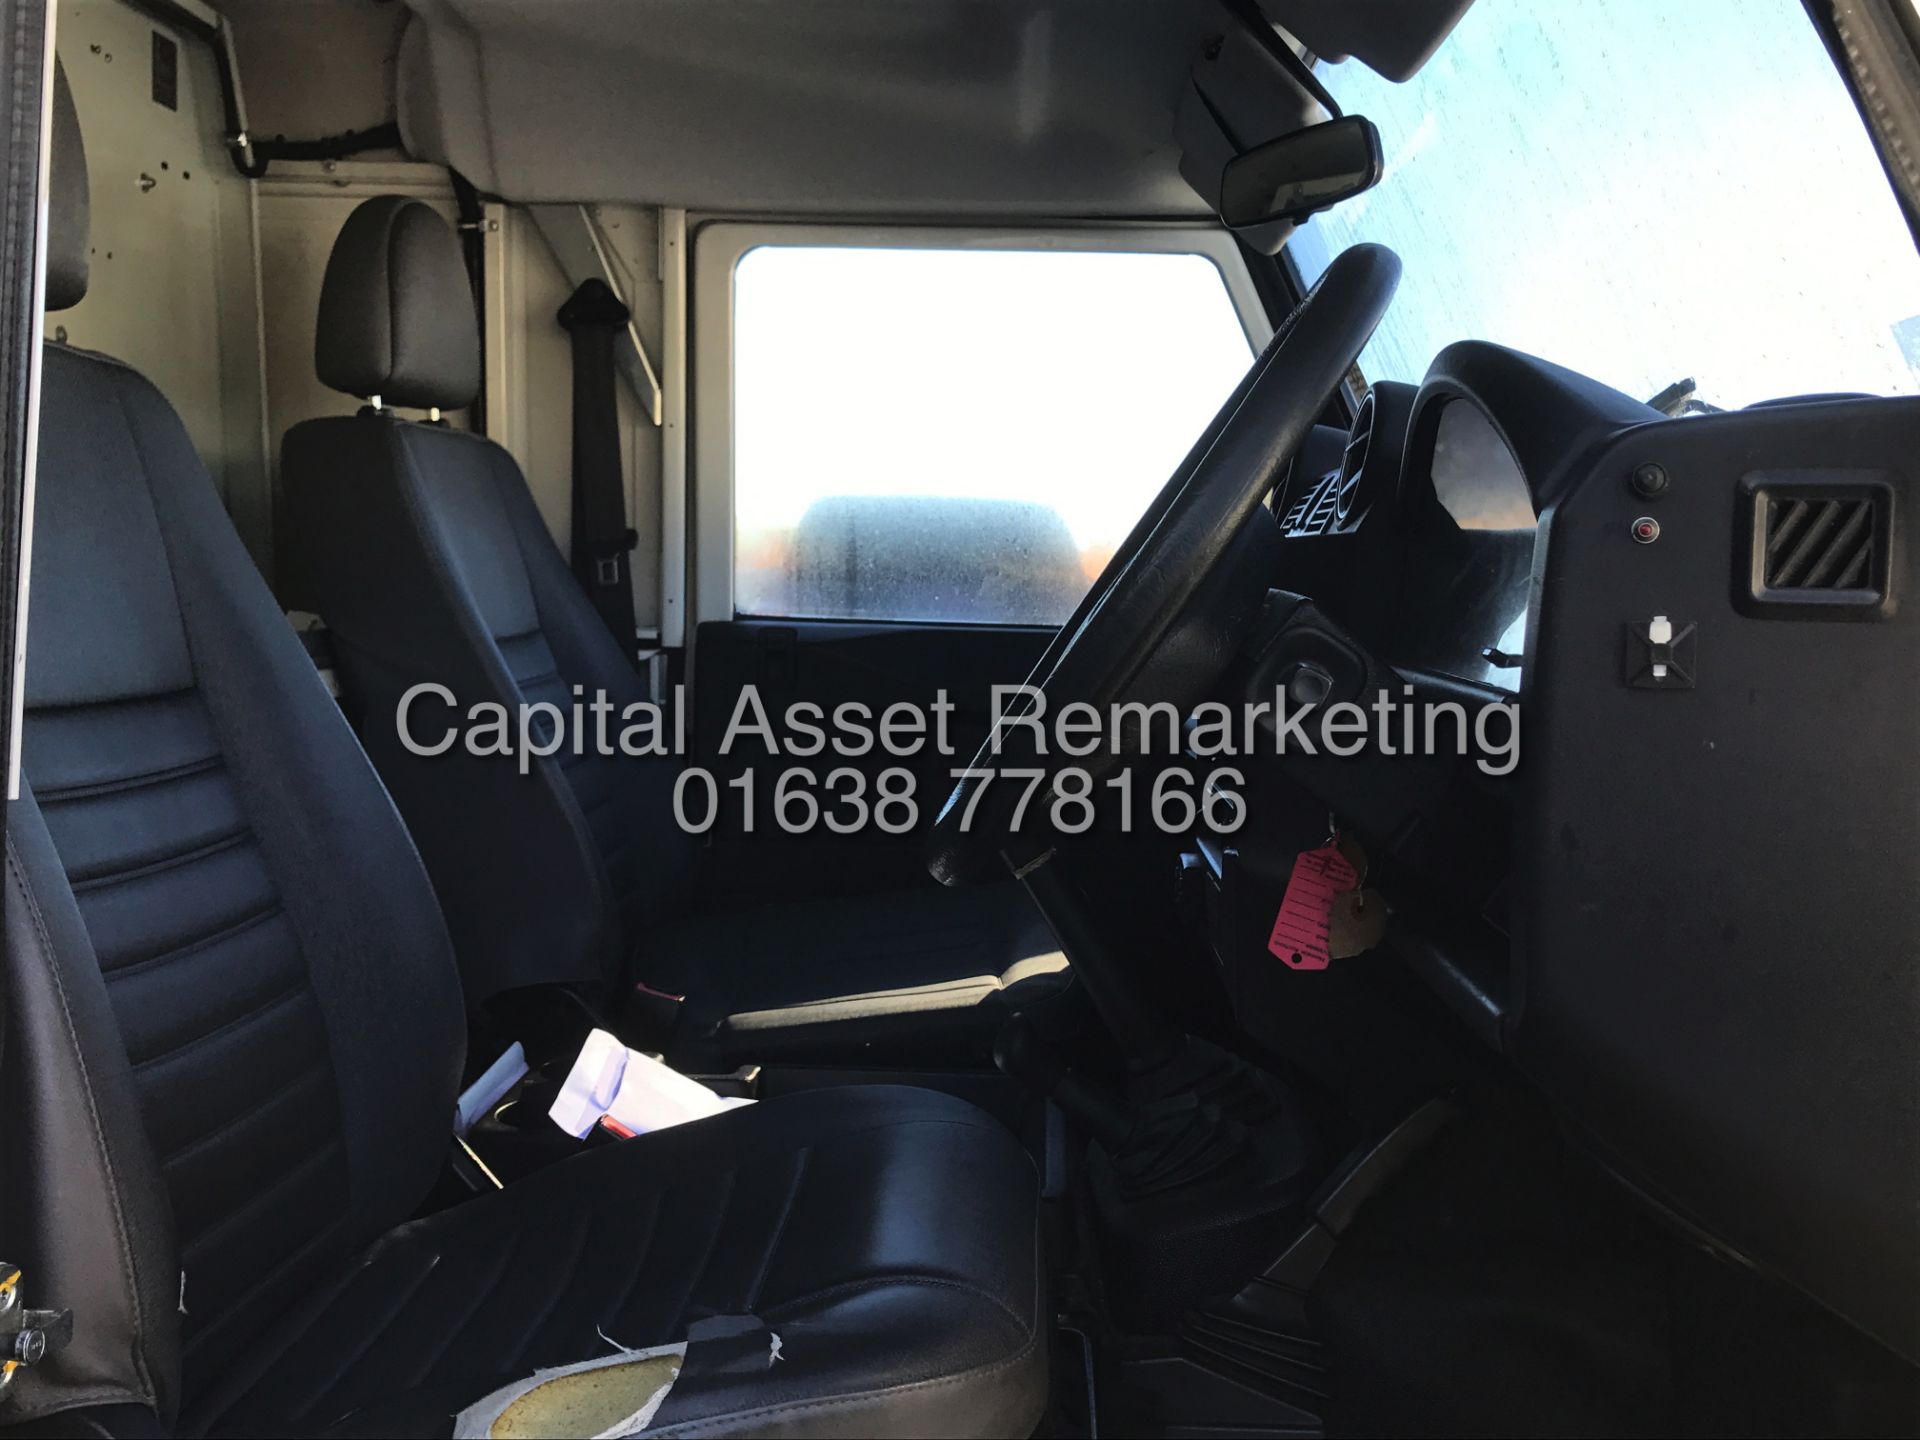 (ON SALE) LAND ROVER DEFENDER 2.4TDCI 110 HARD TOP (SPECIAL UTILITY VEHICLE) 6 SPEED (2010) 1 OWNER - Image 5 of 9